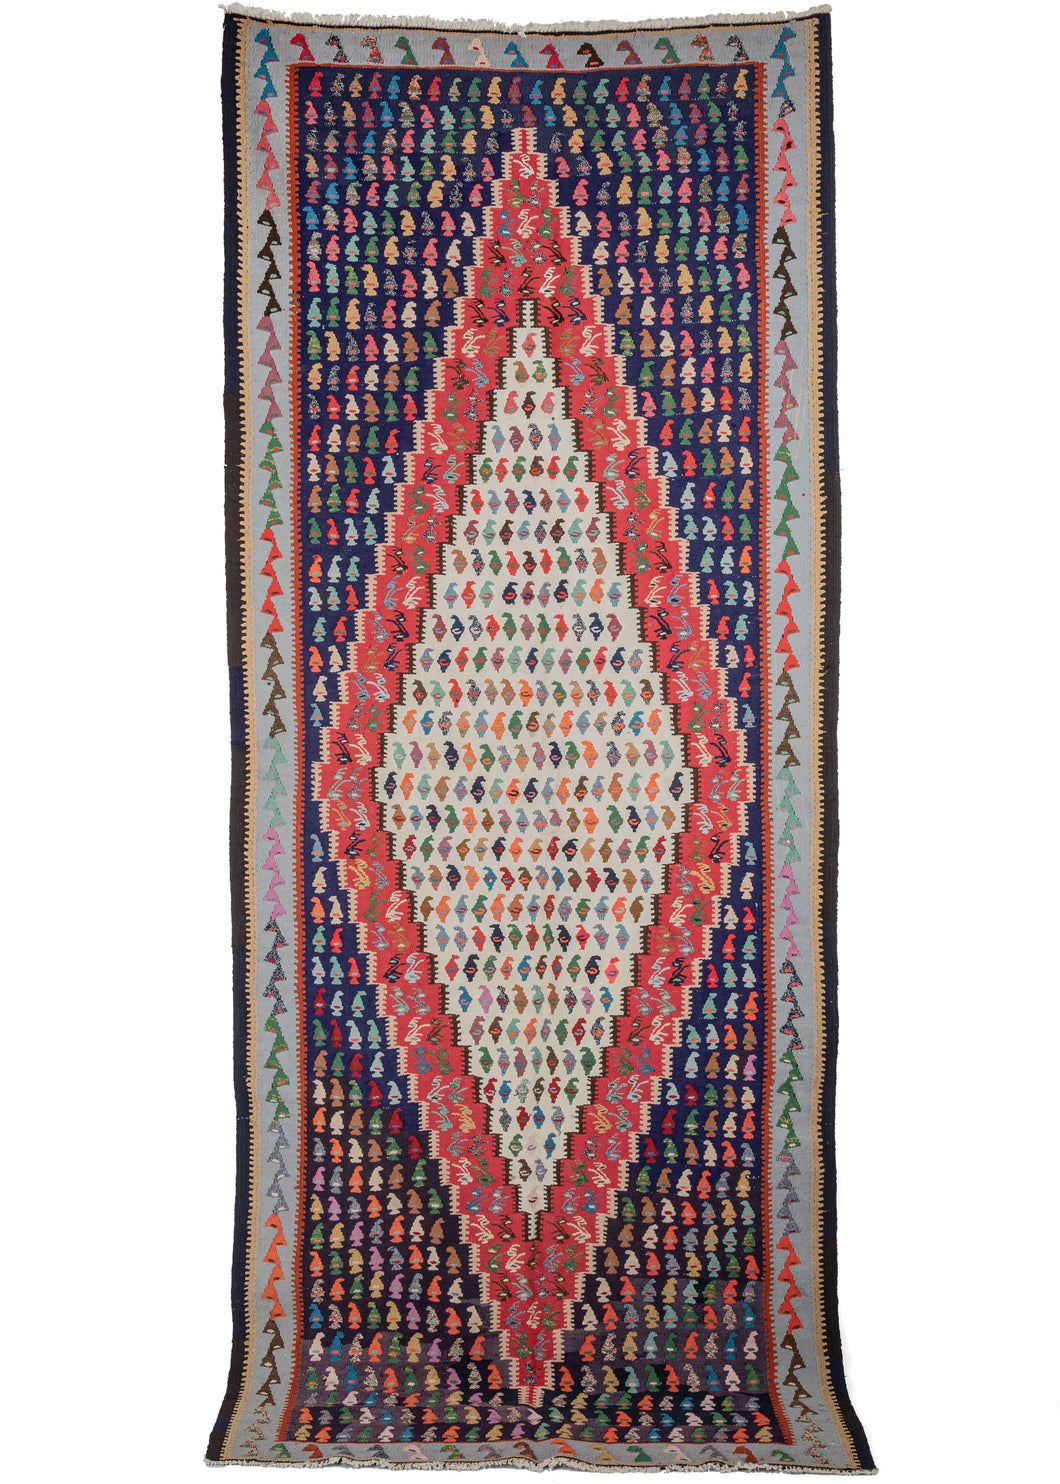 NW Persian kilim runner featuring a bold central diamond woven in white and red on variegated purple field encapsulated by a thin pale blue border. Polychrome botehs (paisley) triangles and birds fill all the open space in blues, reds, purples, orange, greens and yellows.